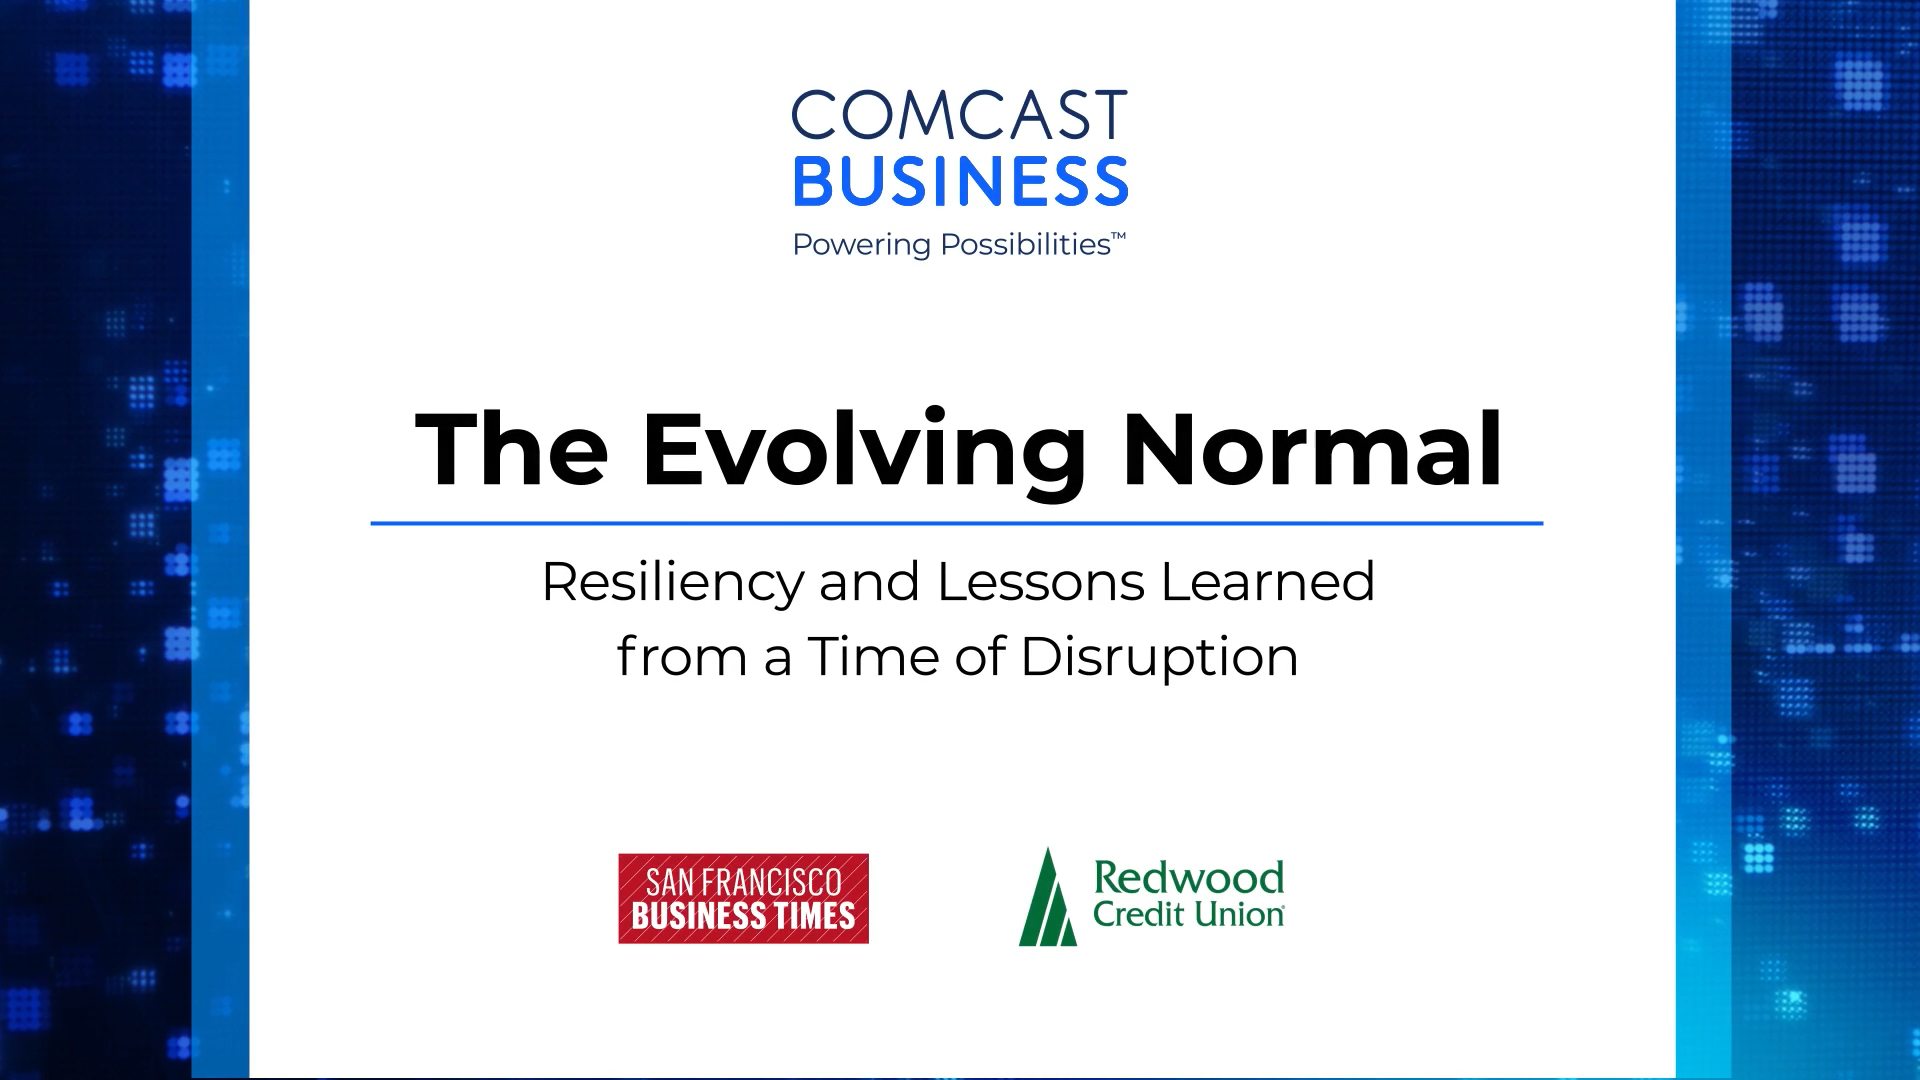 The Evolving Normal: Resiliency and Lessons Learned from a Time of Disruption